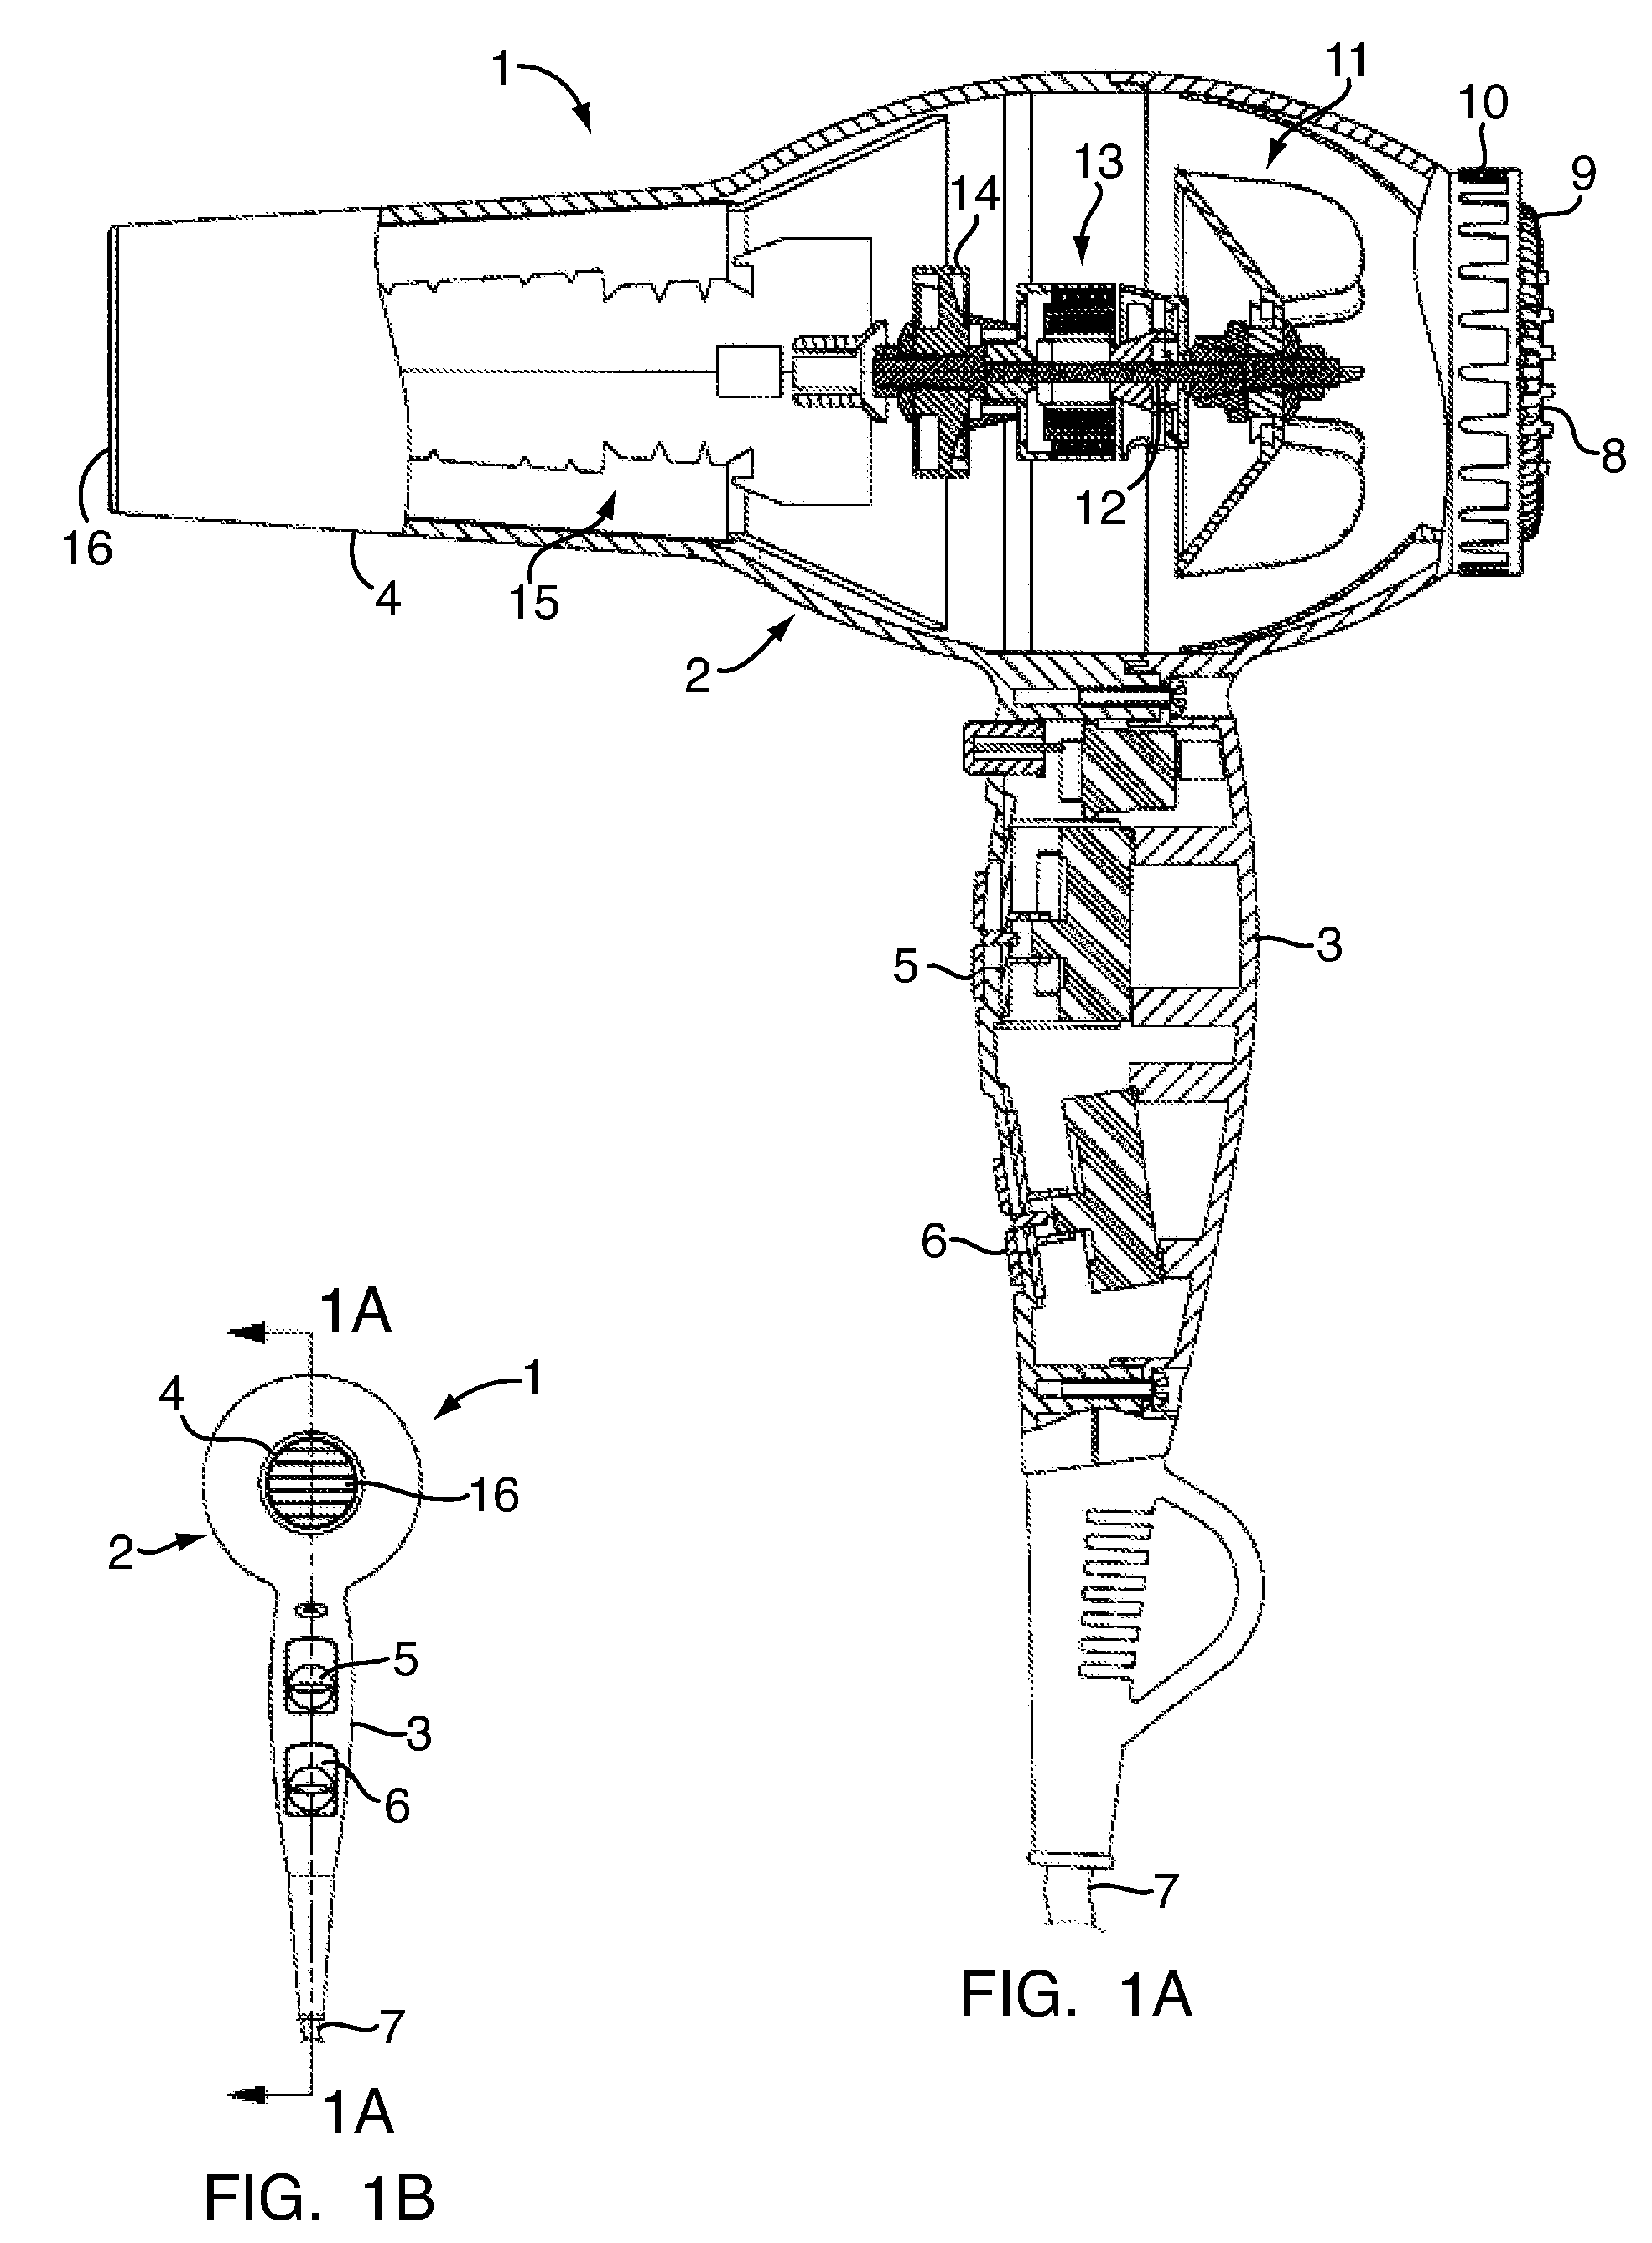 Appliances with brushless motors